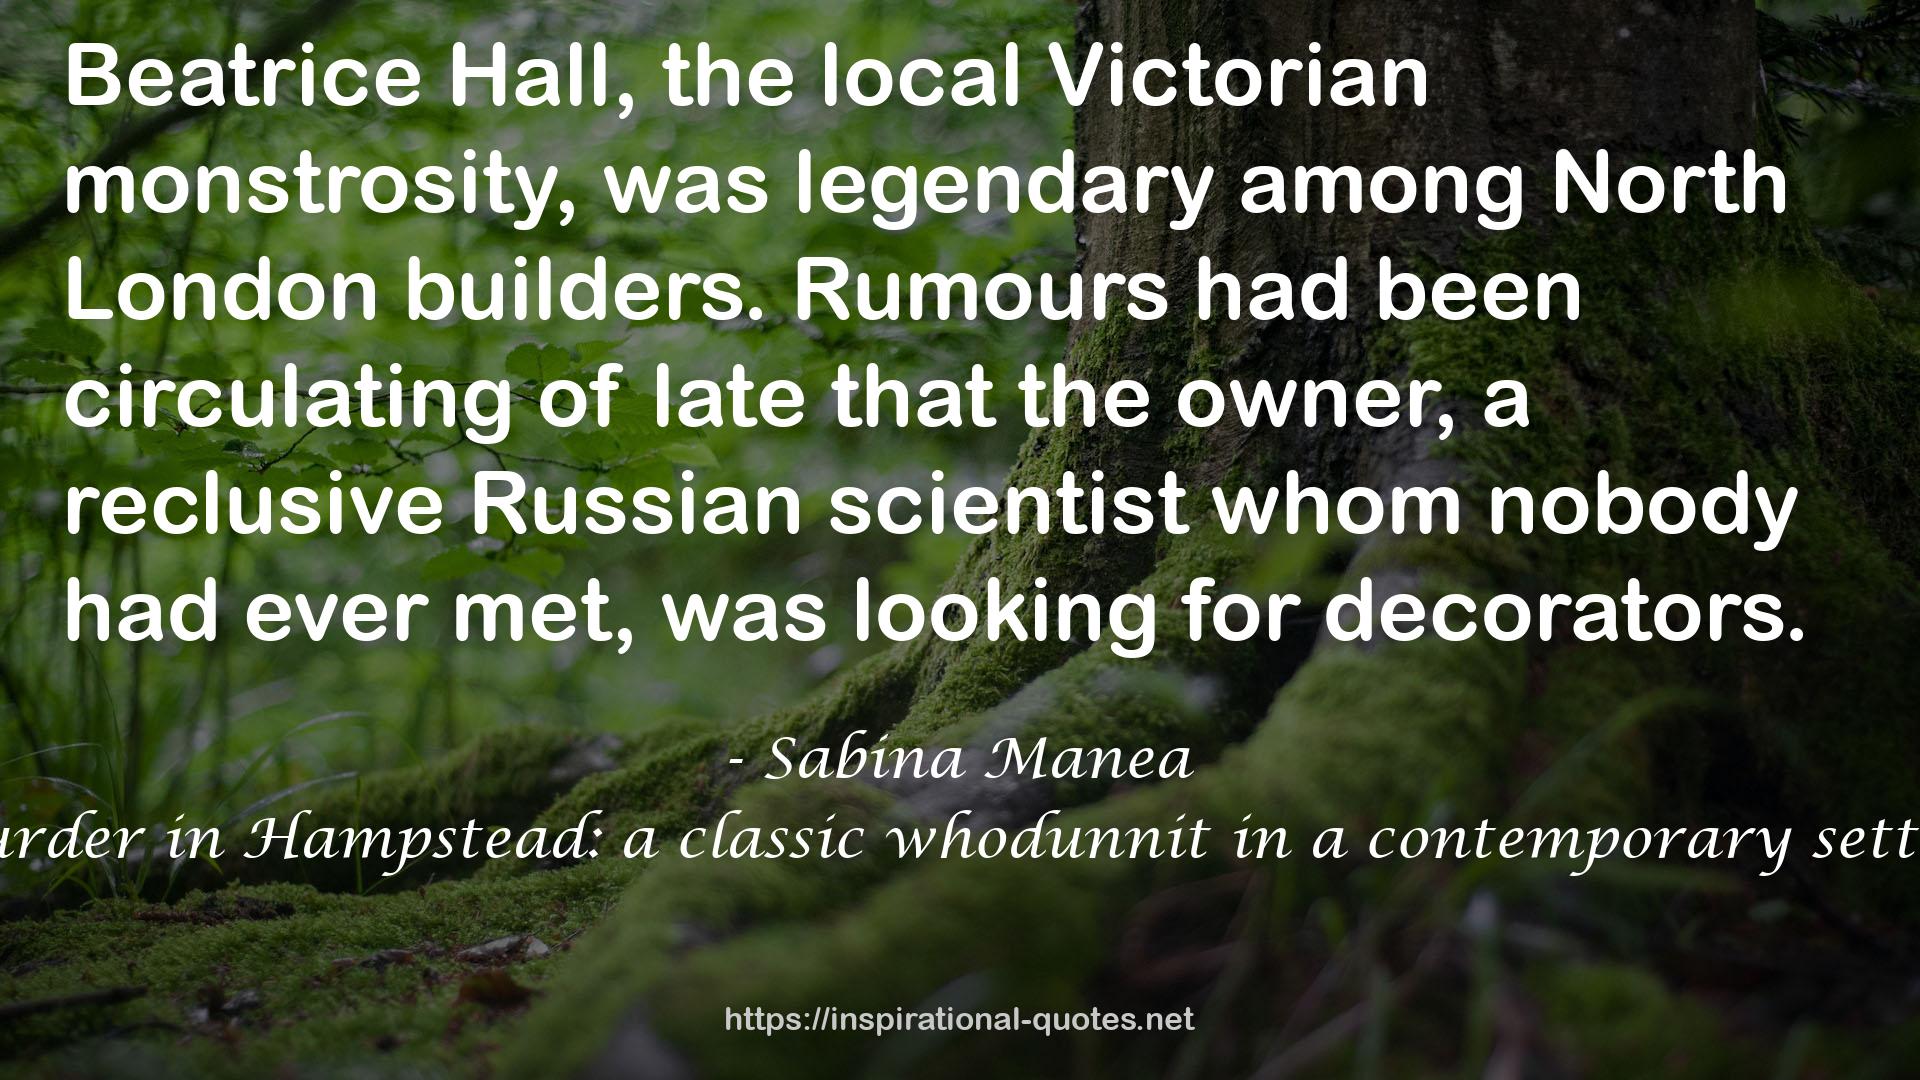 Murder in Hampstead: a classic whodunnit in a contemporary setting QUOTES